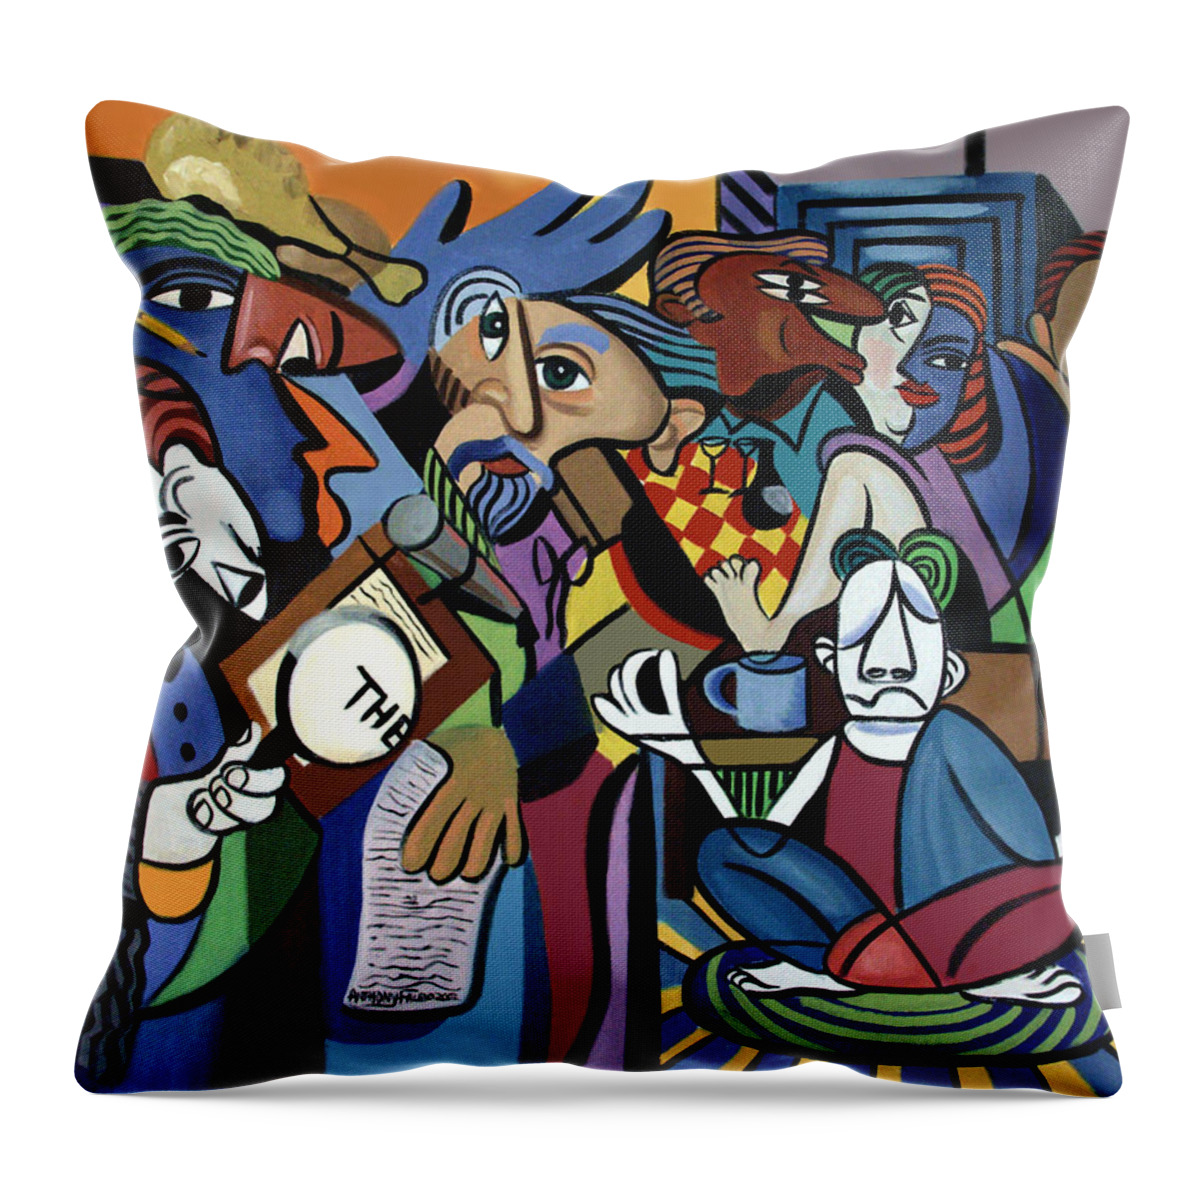 Poets Unleashed Men Talking Reading Yoga Coffee Chicken The Cubism Cubestraction Bench Impressionist Expressionism Large Giclee Canvas Print Poster Original Oil Painting On Canvas Anthony Falbo Falboart   Throw Pillow featuring the painting Poets Unleashed by Anthony Falbo